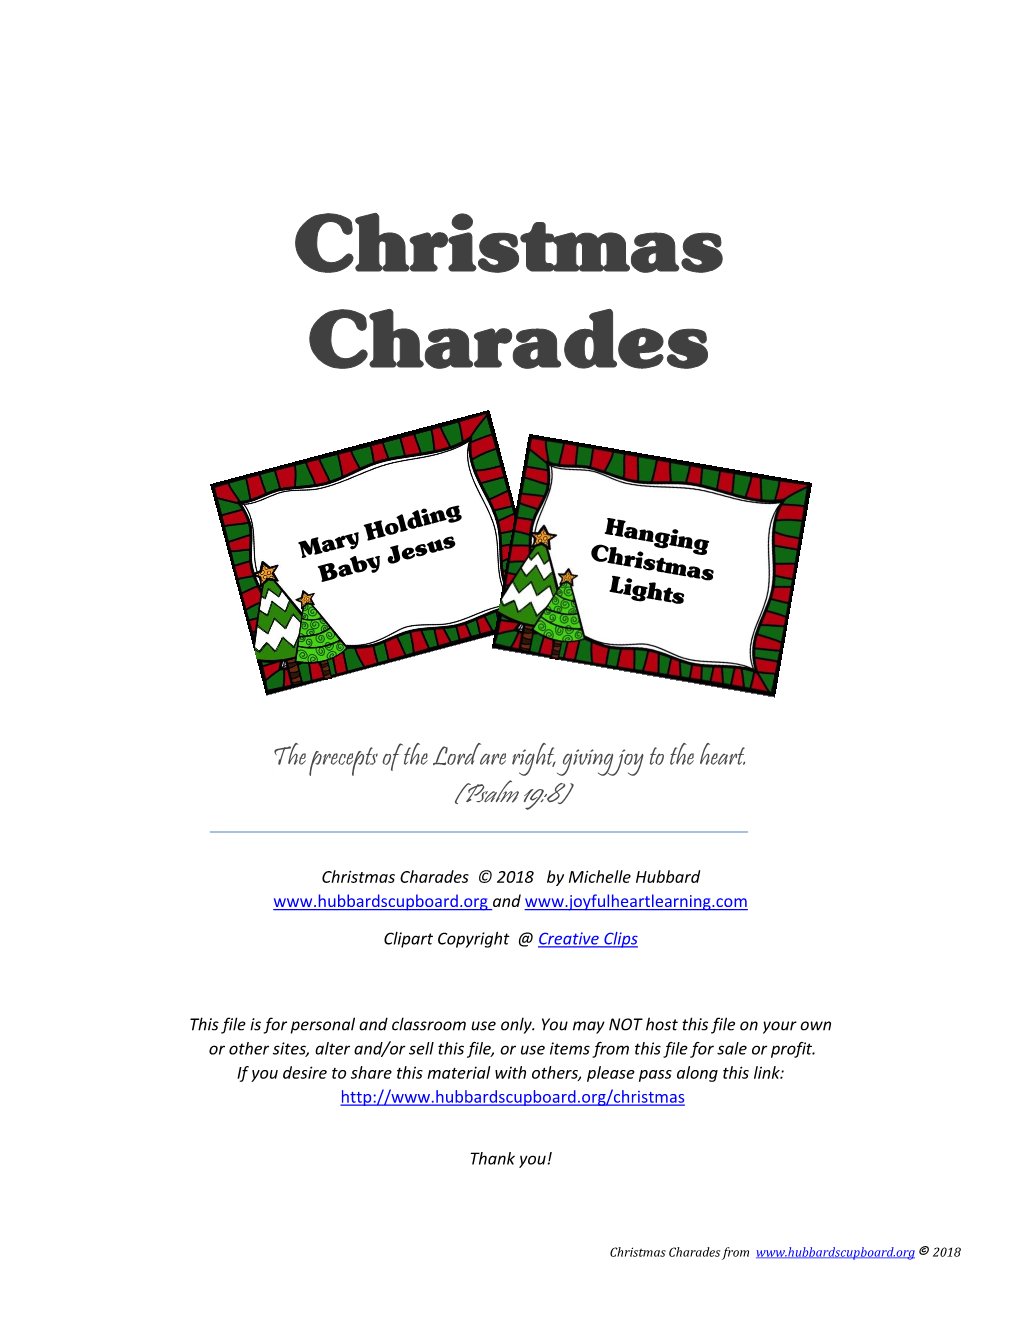 Christmas Charades © 2018 by Michelle Hubbard And